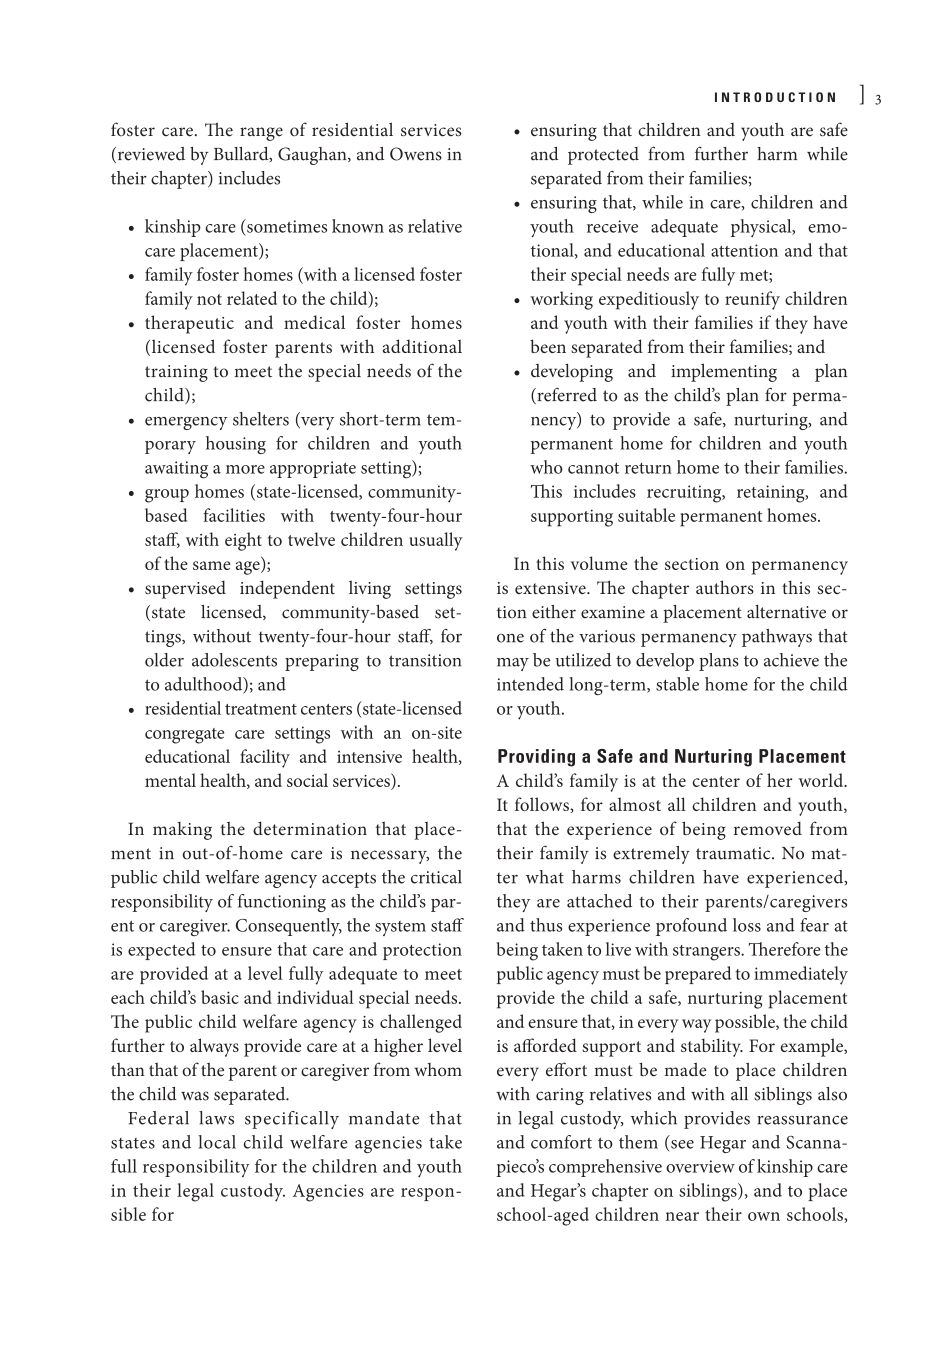 Child Welfare for the Twenty-first Century: A Handbook of Practices, Policies, and Programs, second edition page 3